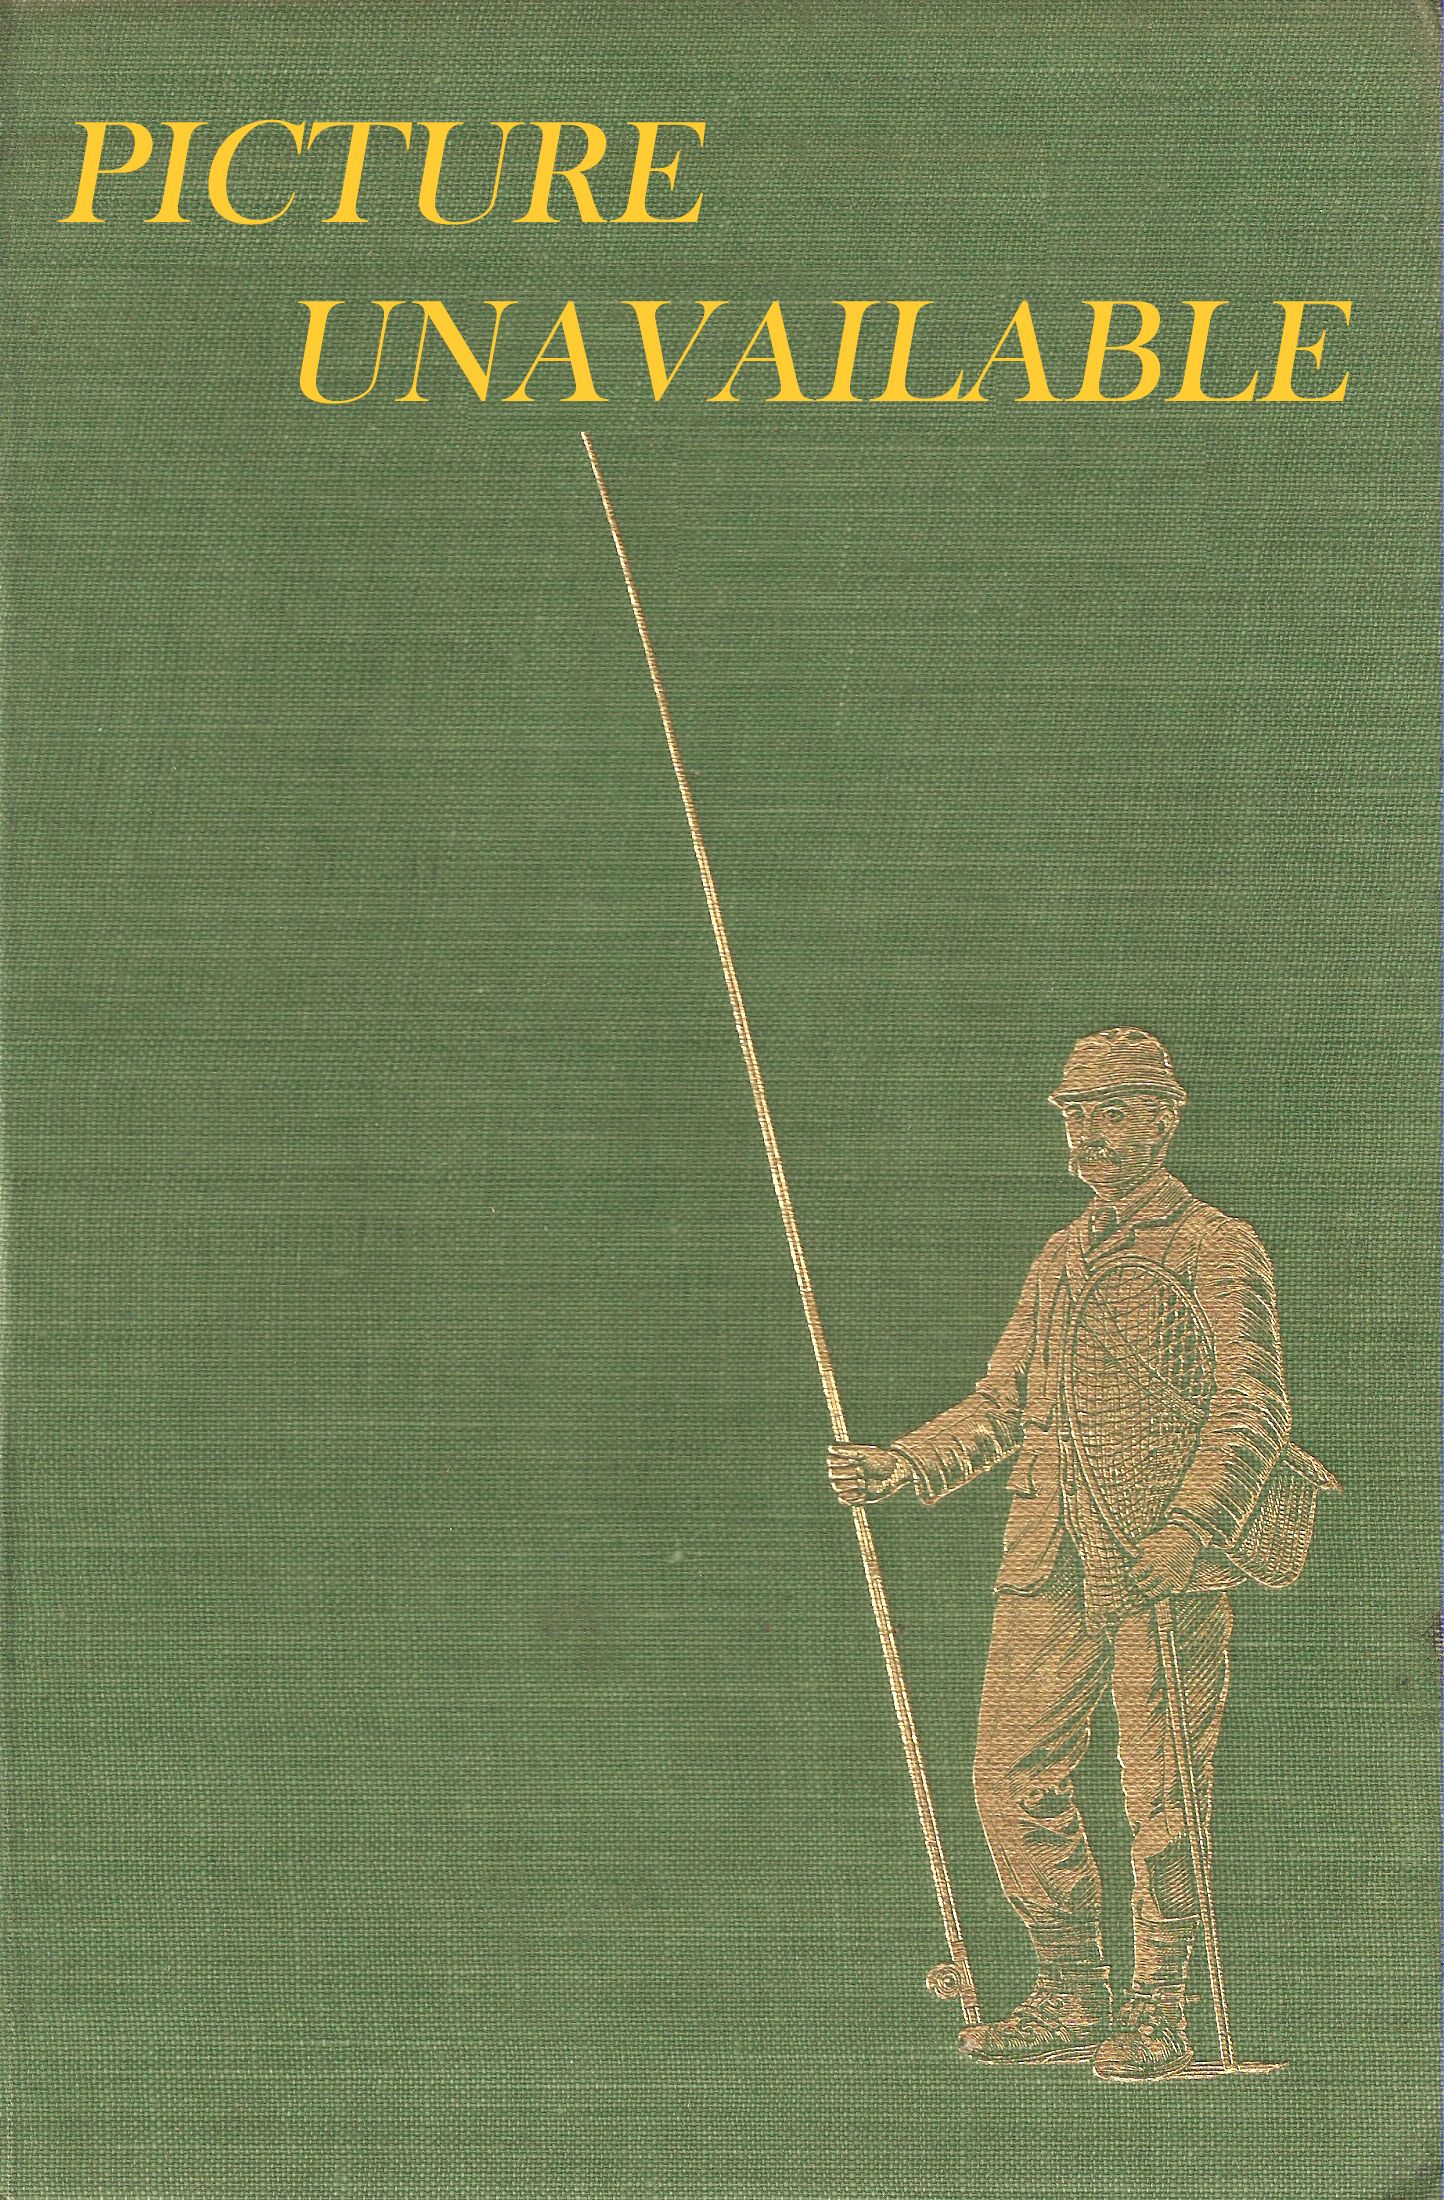 WALES ANGLING GUIDE. Edited by Clive Gammon.